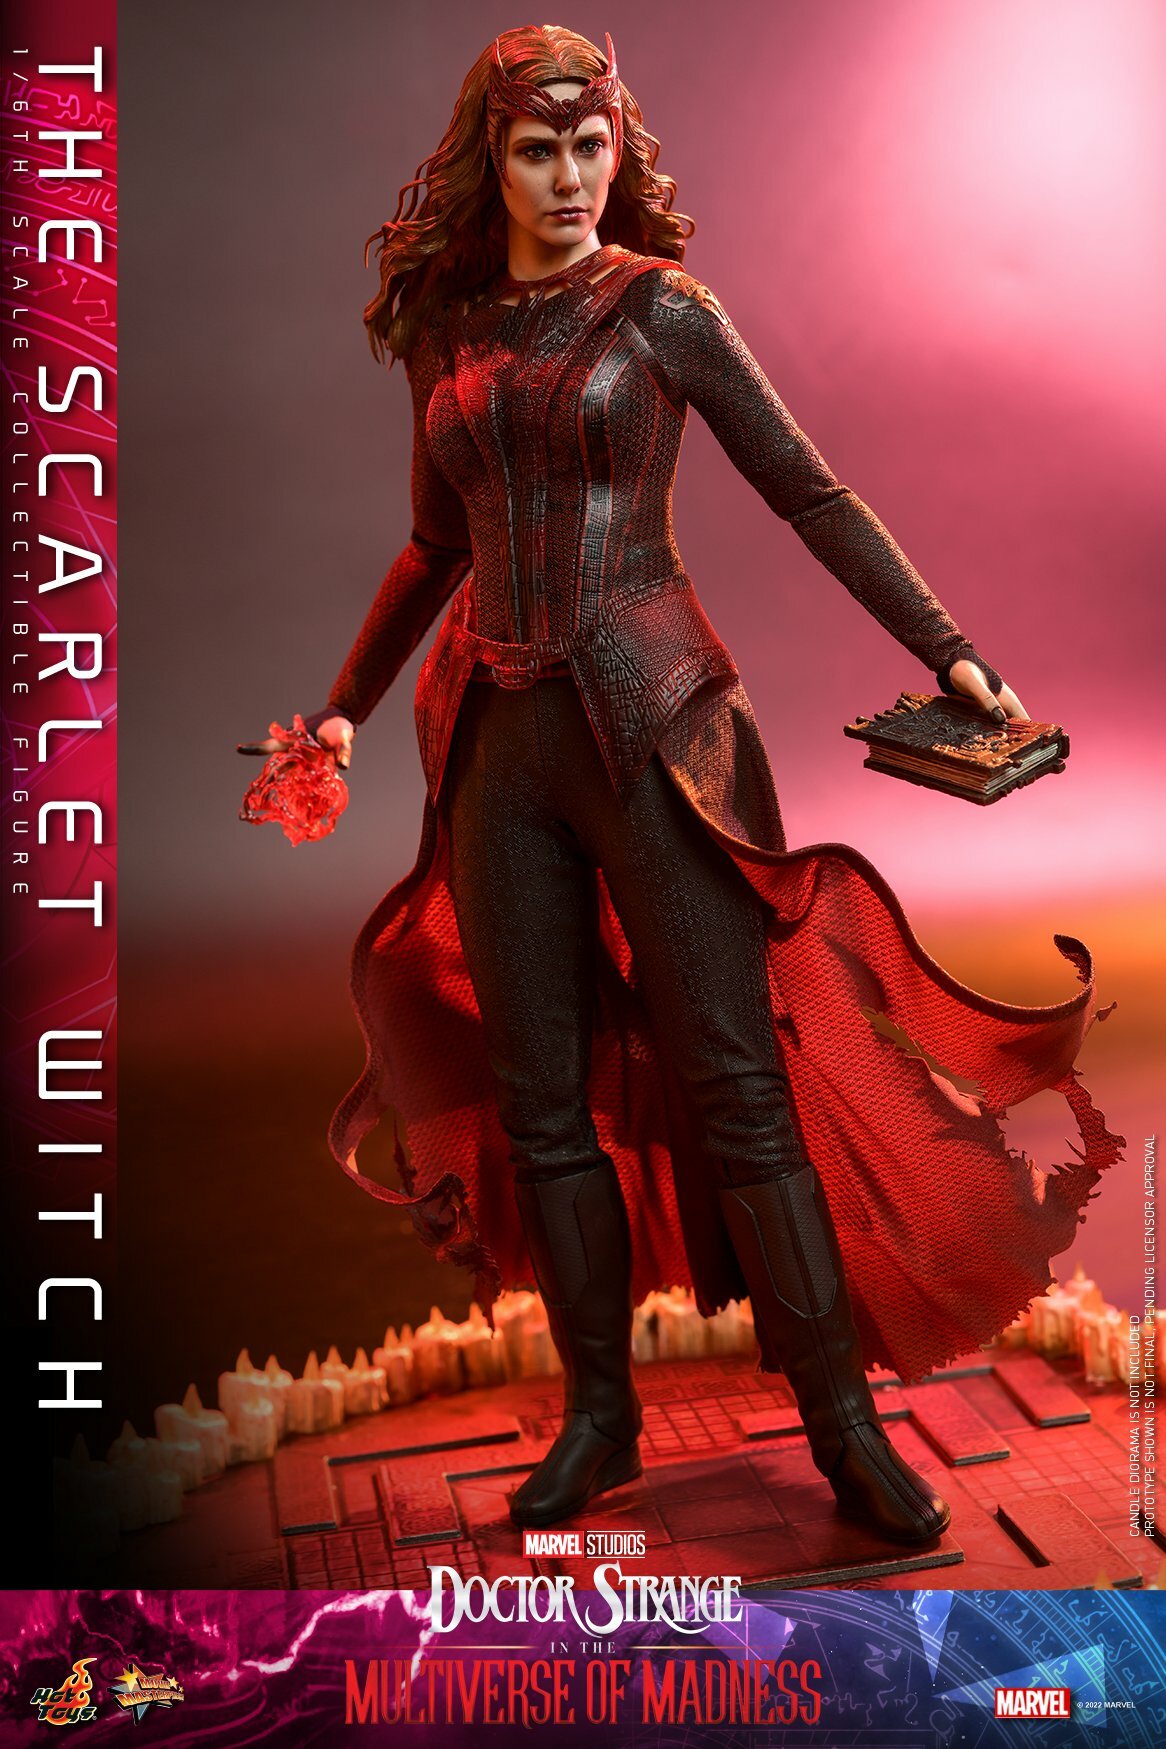 Hot-Toy-Multiverse-of-Madness-Scarlet-Witch-004.jpg.1e045db70634e3509489d253691b3a4b.jpg